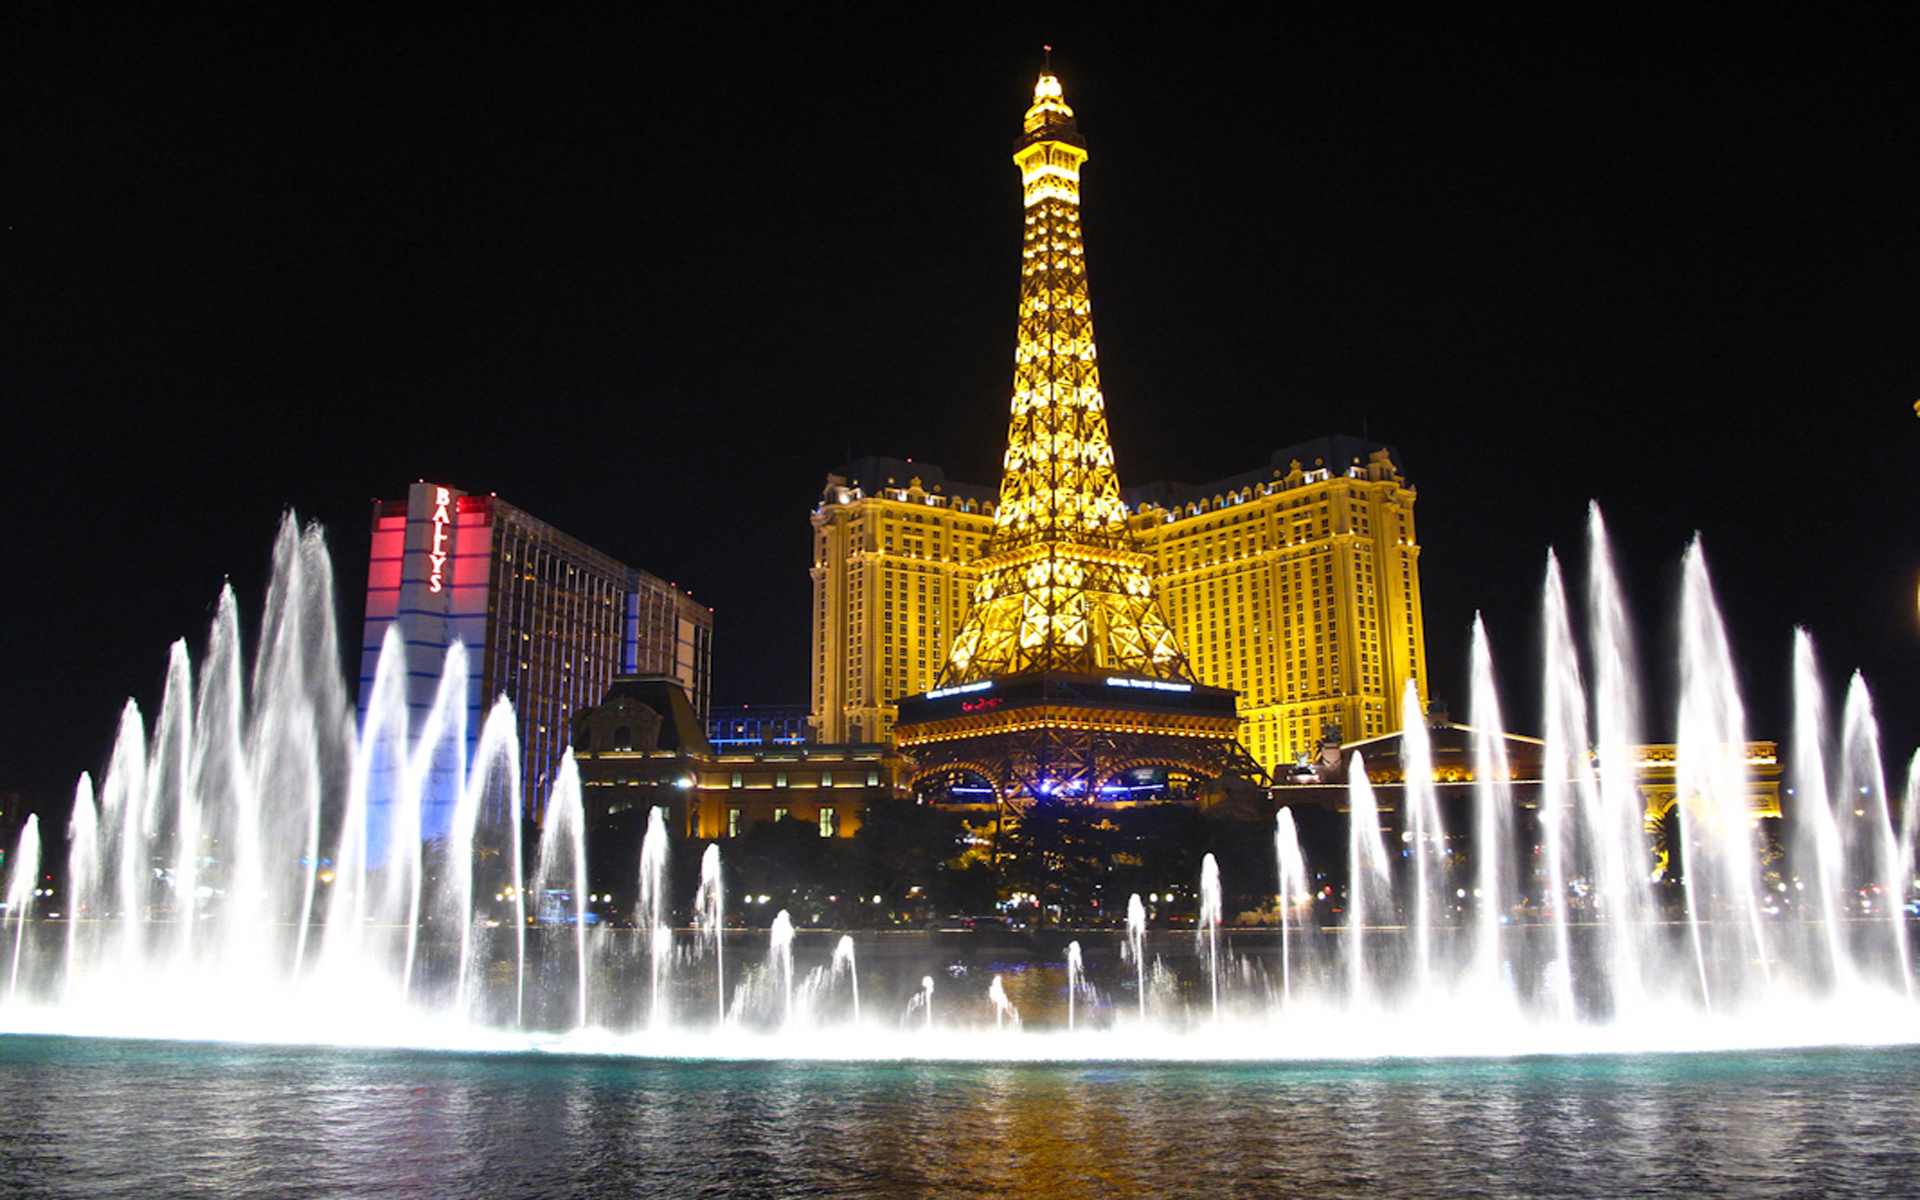 Bellagio Fountains And Hotel Paris With Eiffel Tower Las Vegas